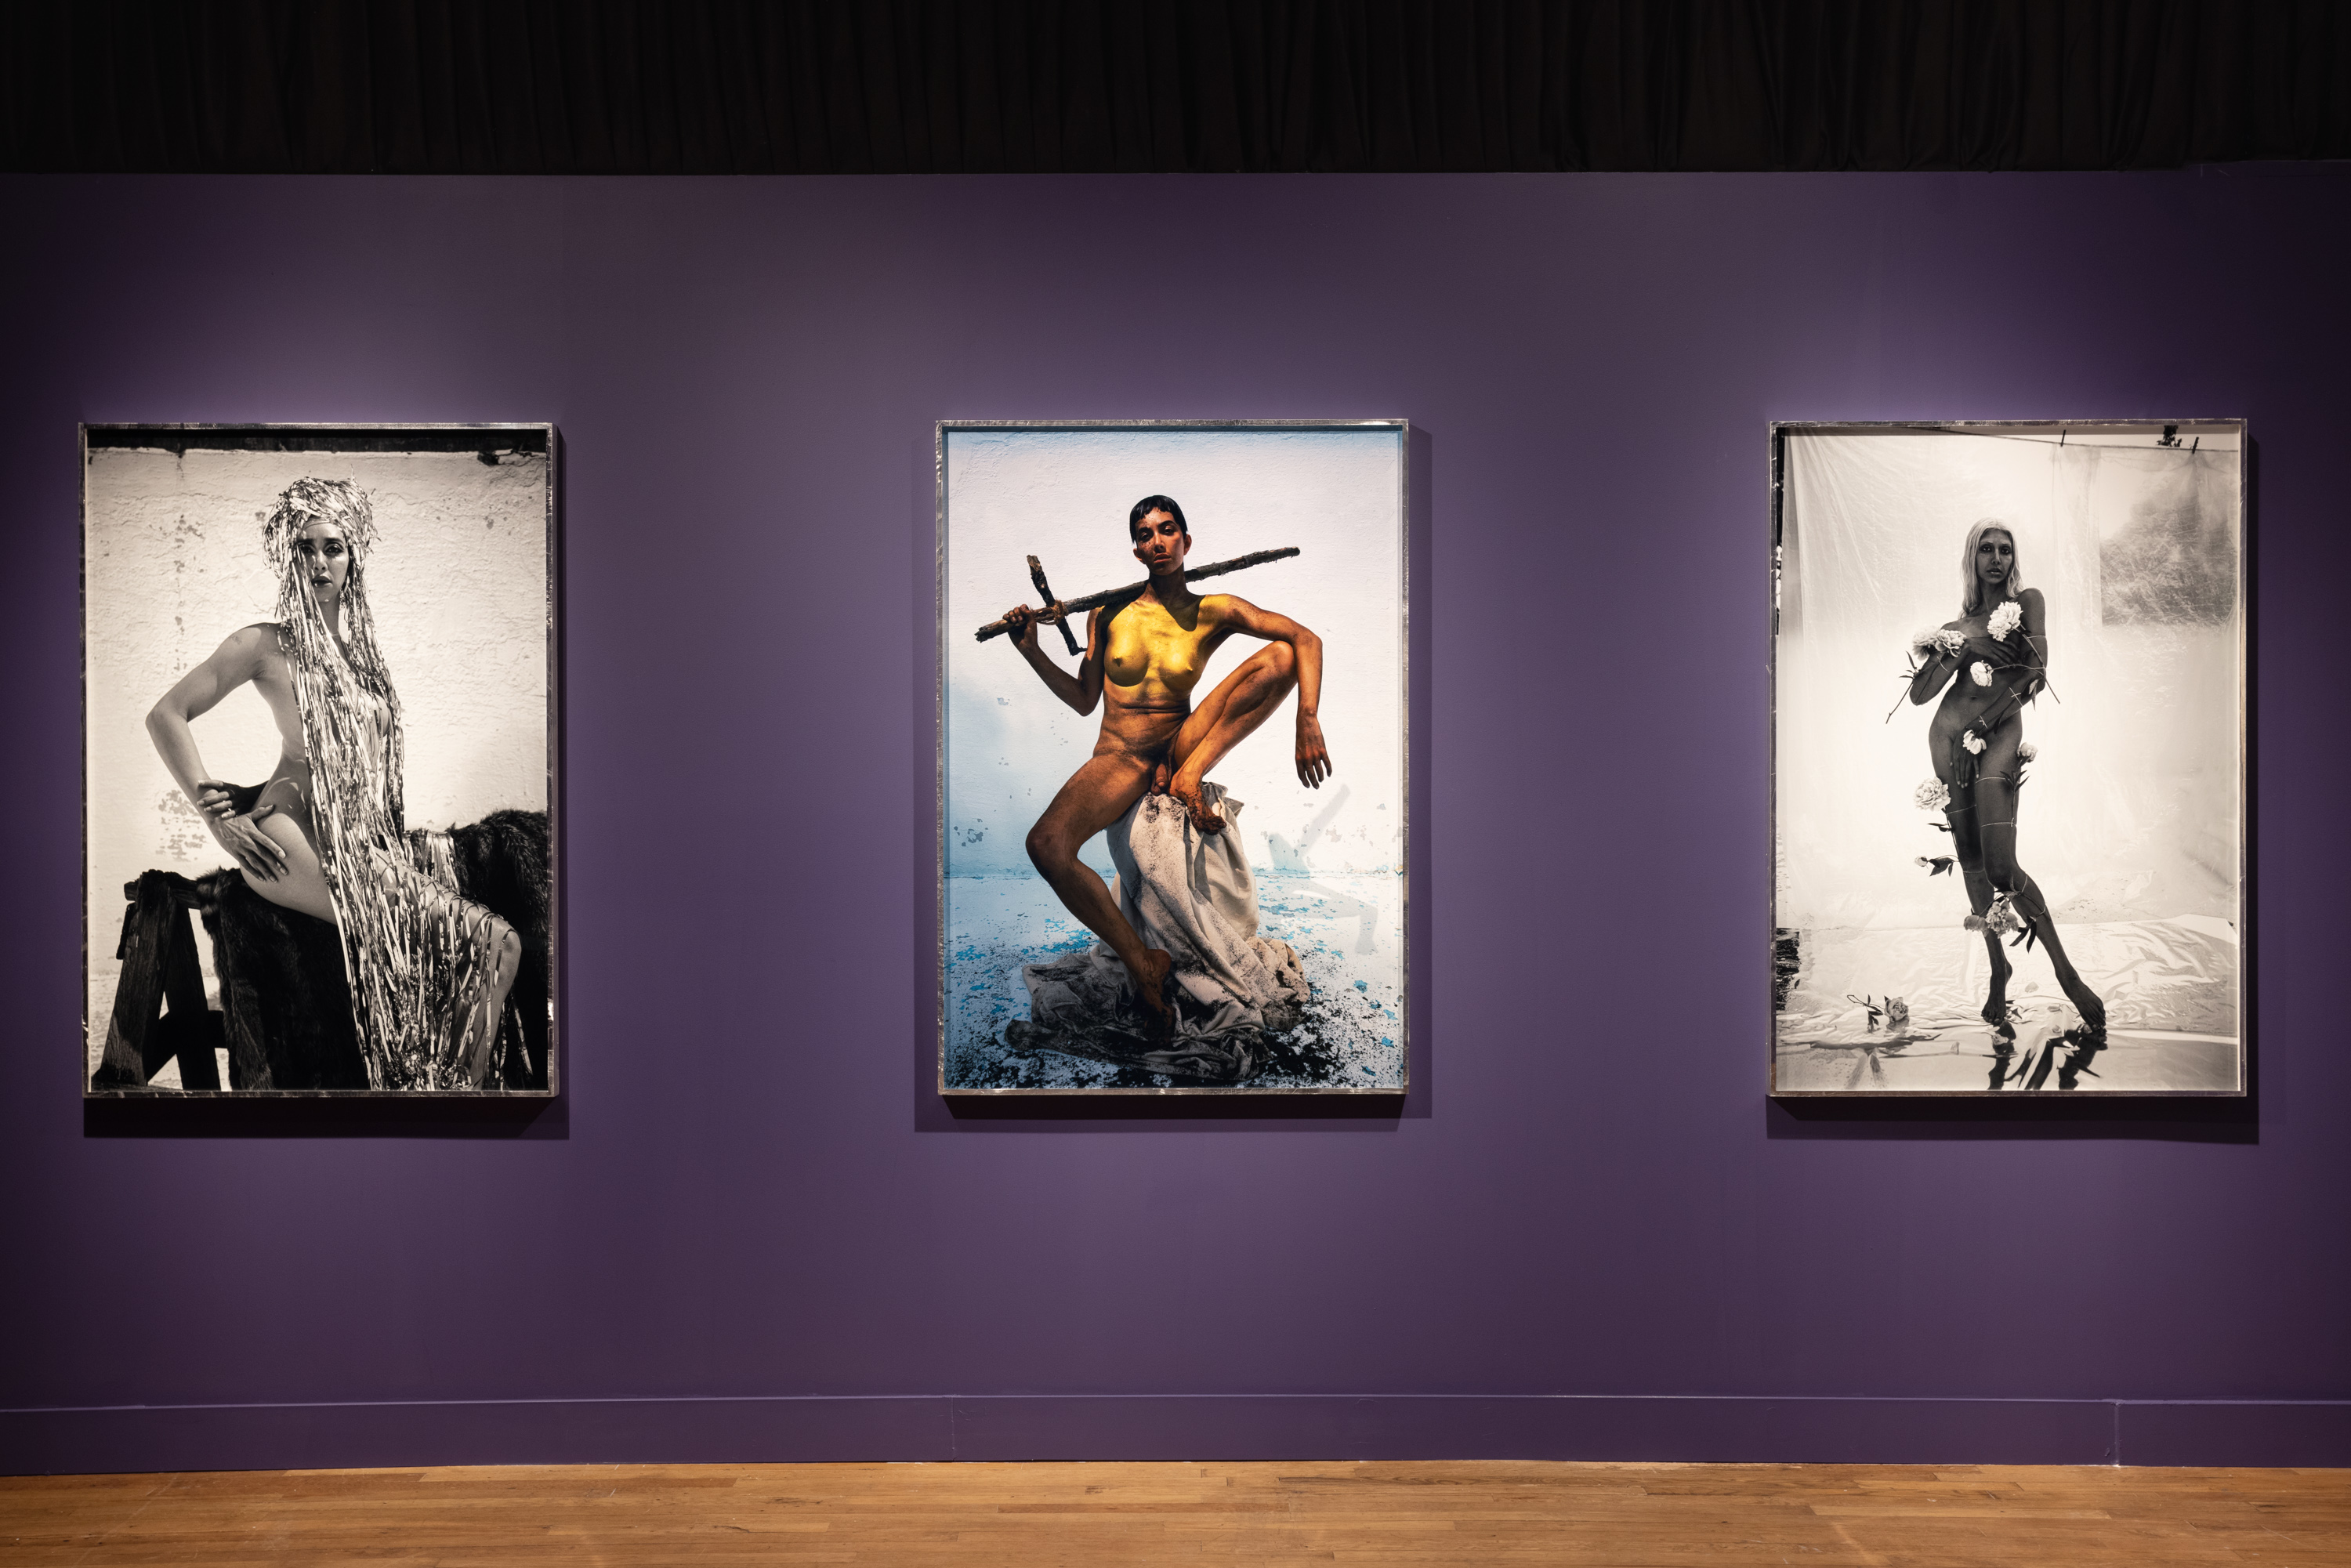 Color image of three framed photographs on purple wall depicting three different historical figures